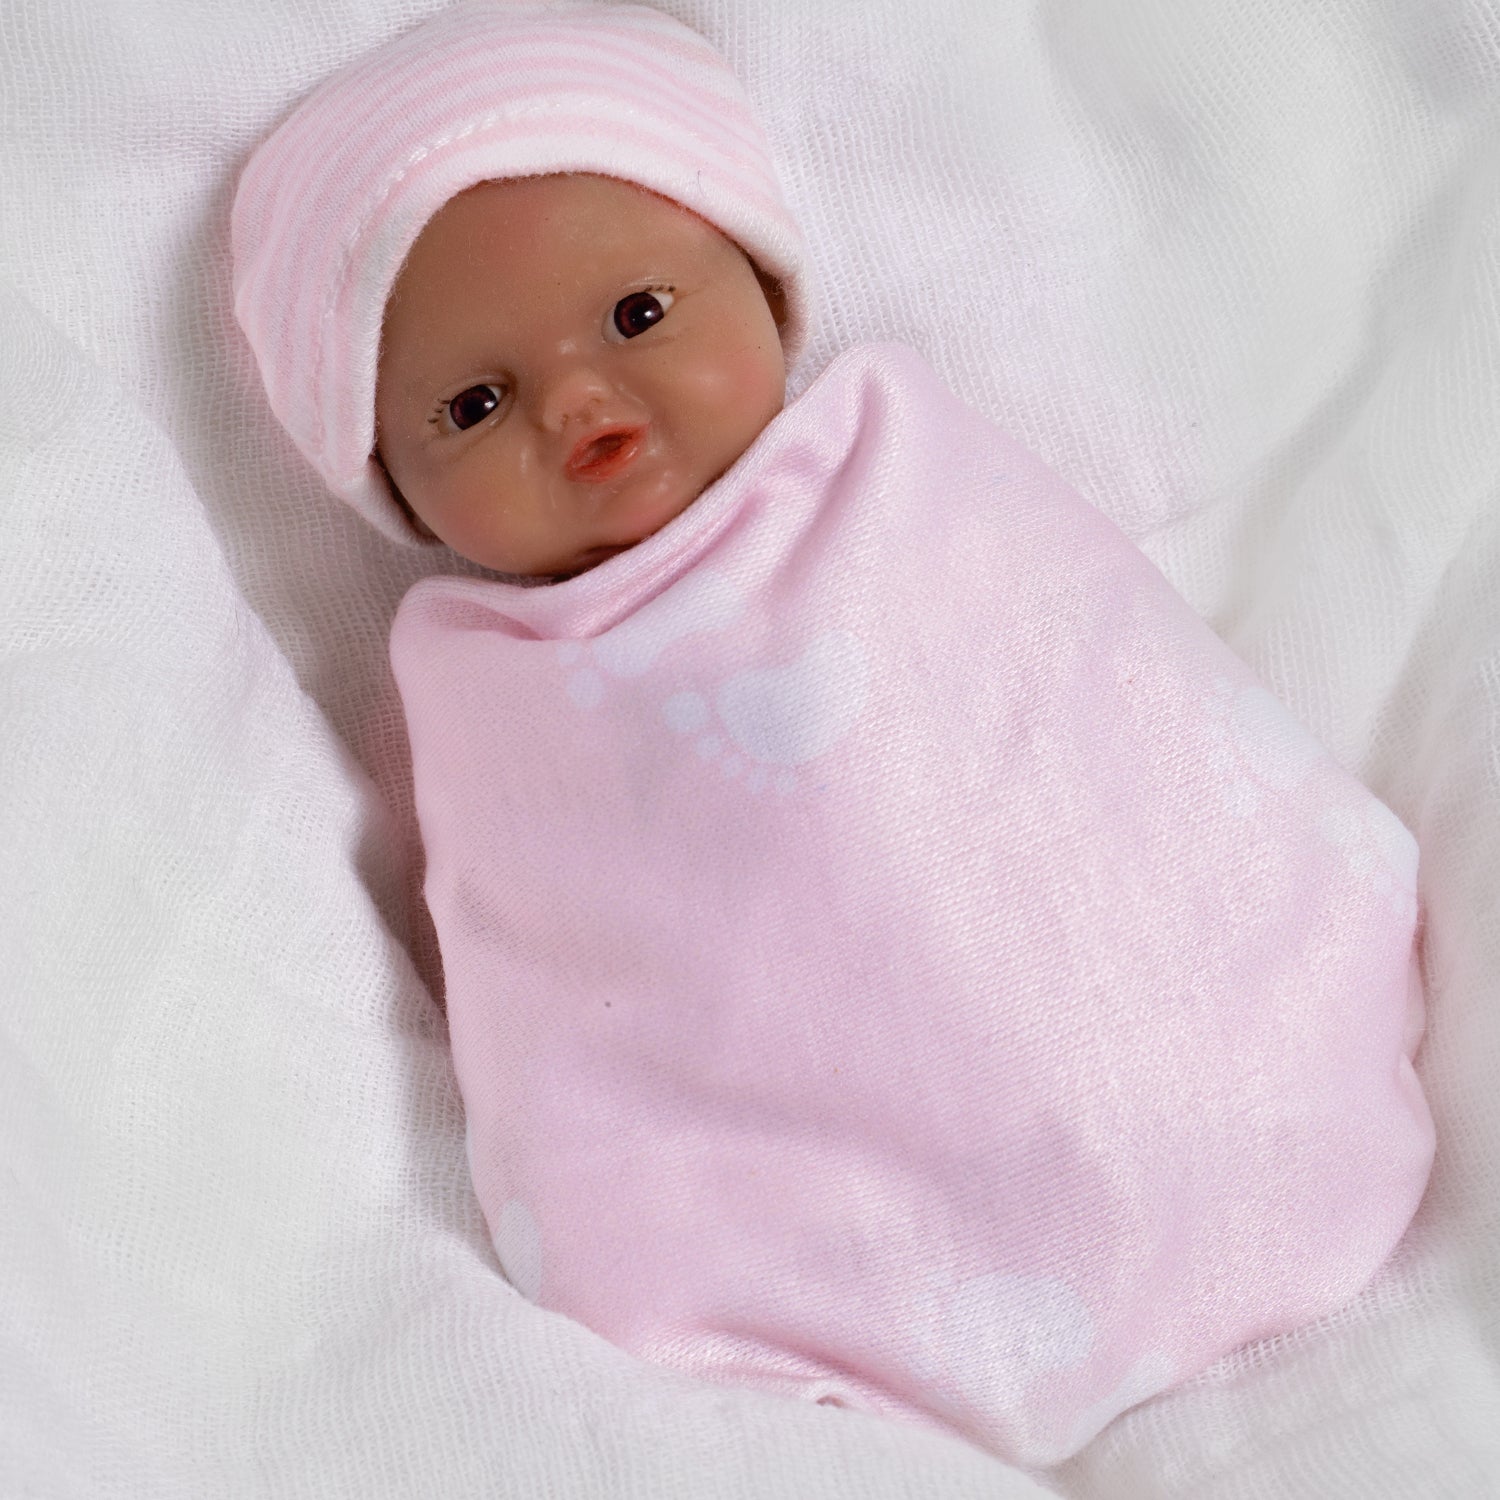 Paradise Galleries Itty Bitty Silicone Babies - Baby Girl, 5 inches, anatomically correct